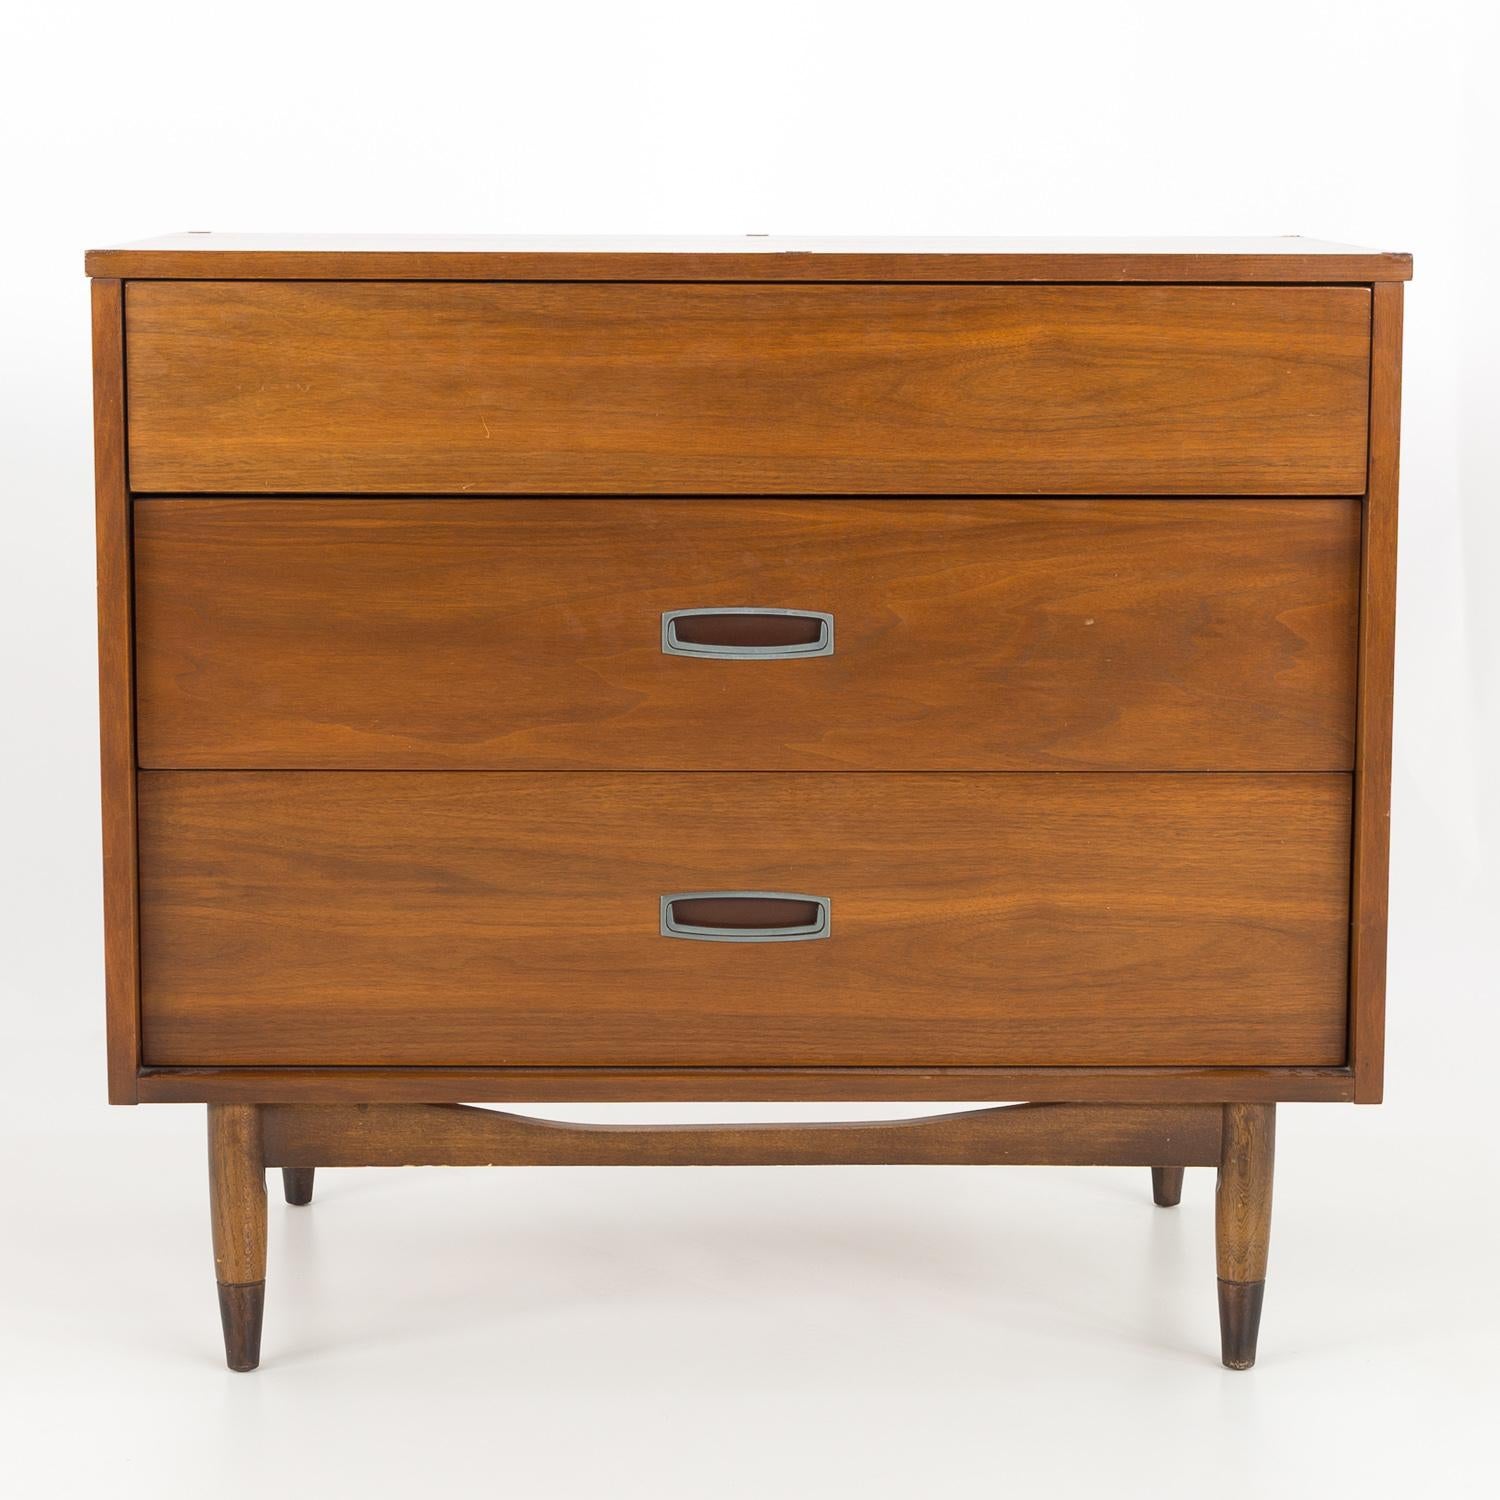 Mainline by Hooker mid century 3 drawer dresser

This dresser measures: 36 wide x 20 deep x 31.75 high

All pieces of furniture can be had in what we call restored vintage condition. That means the piece is restored upon purchase so it’s free of